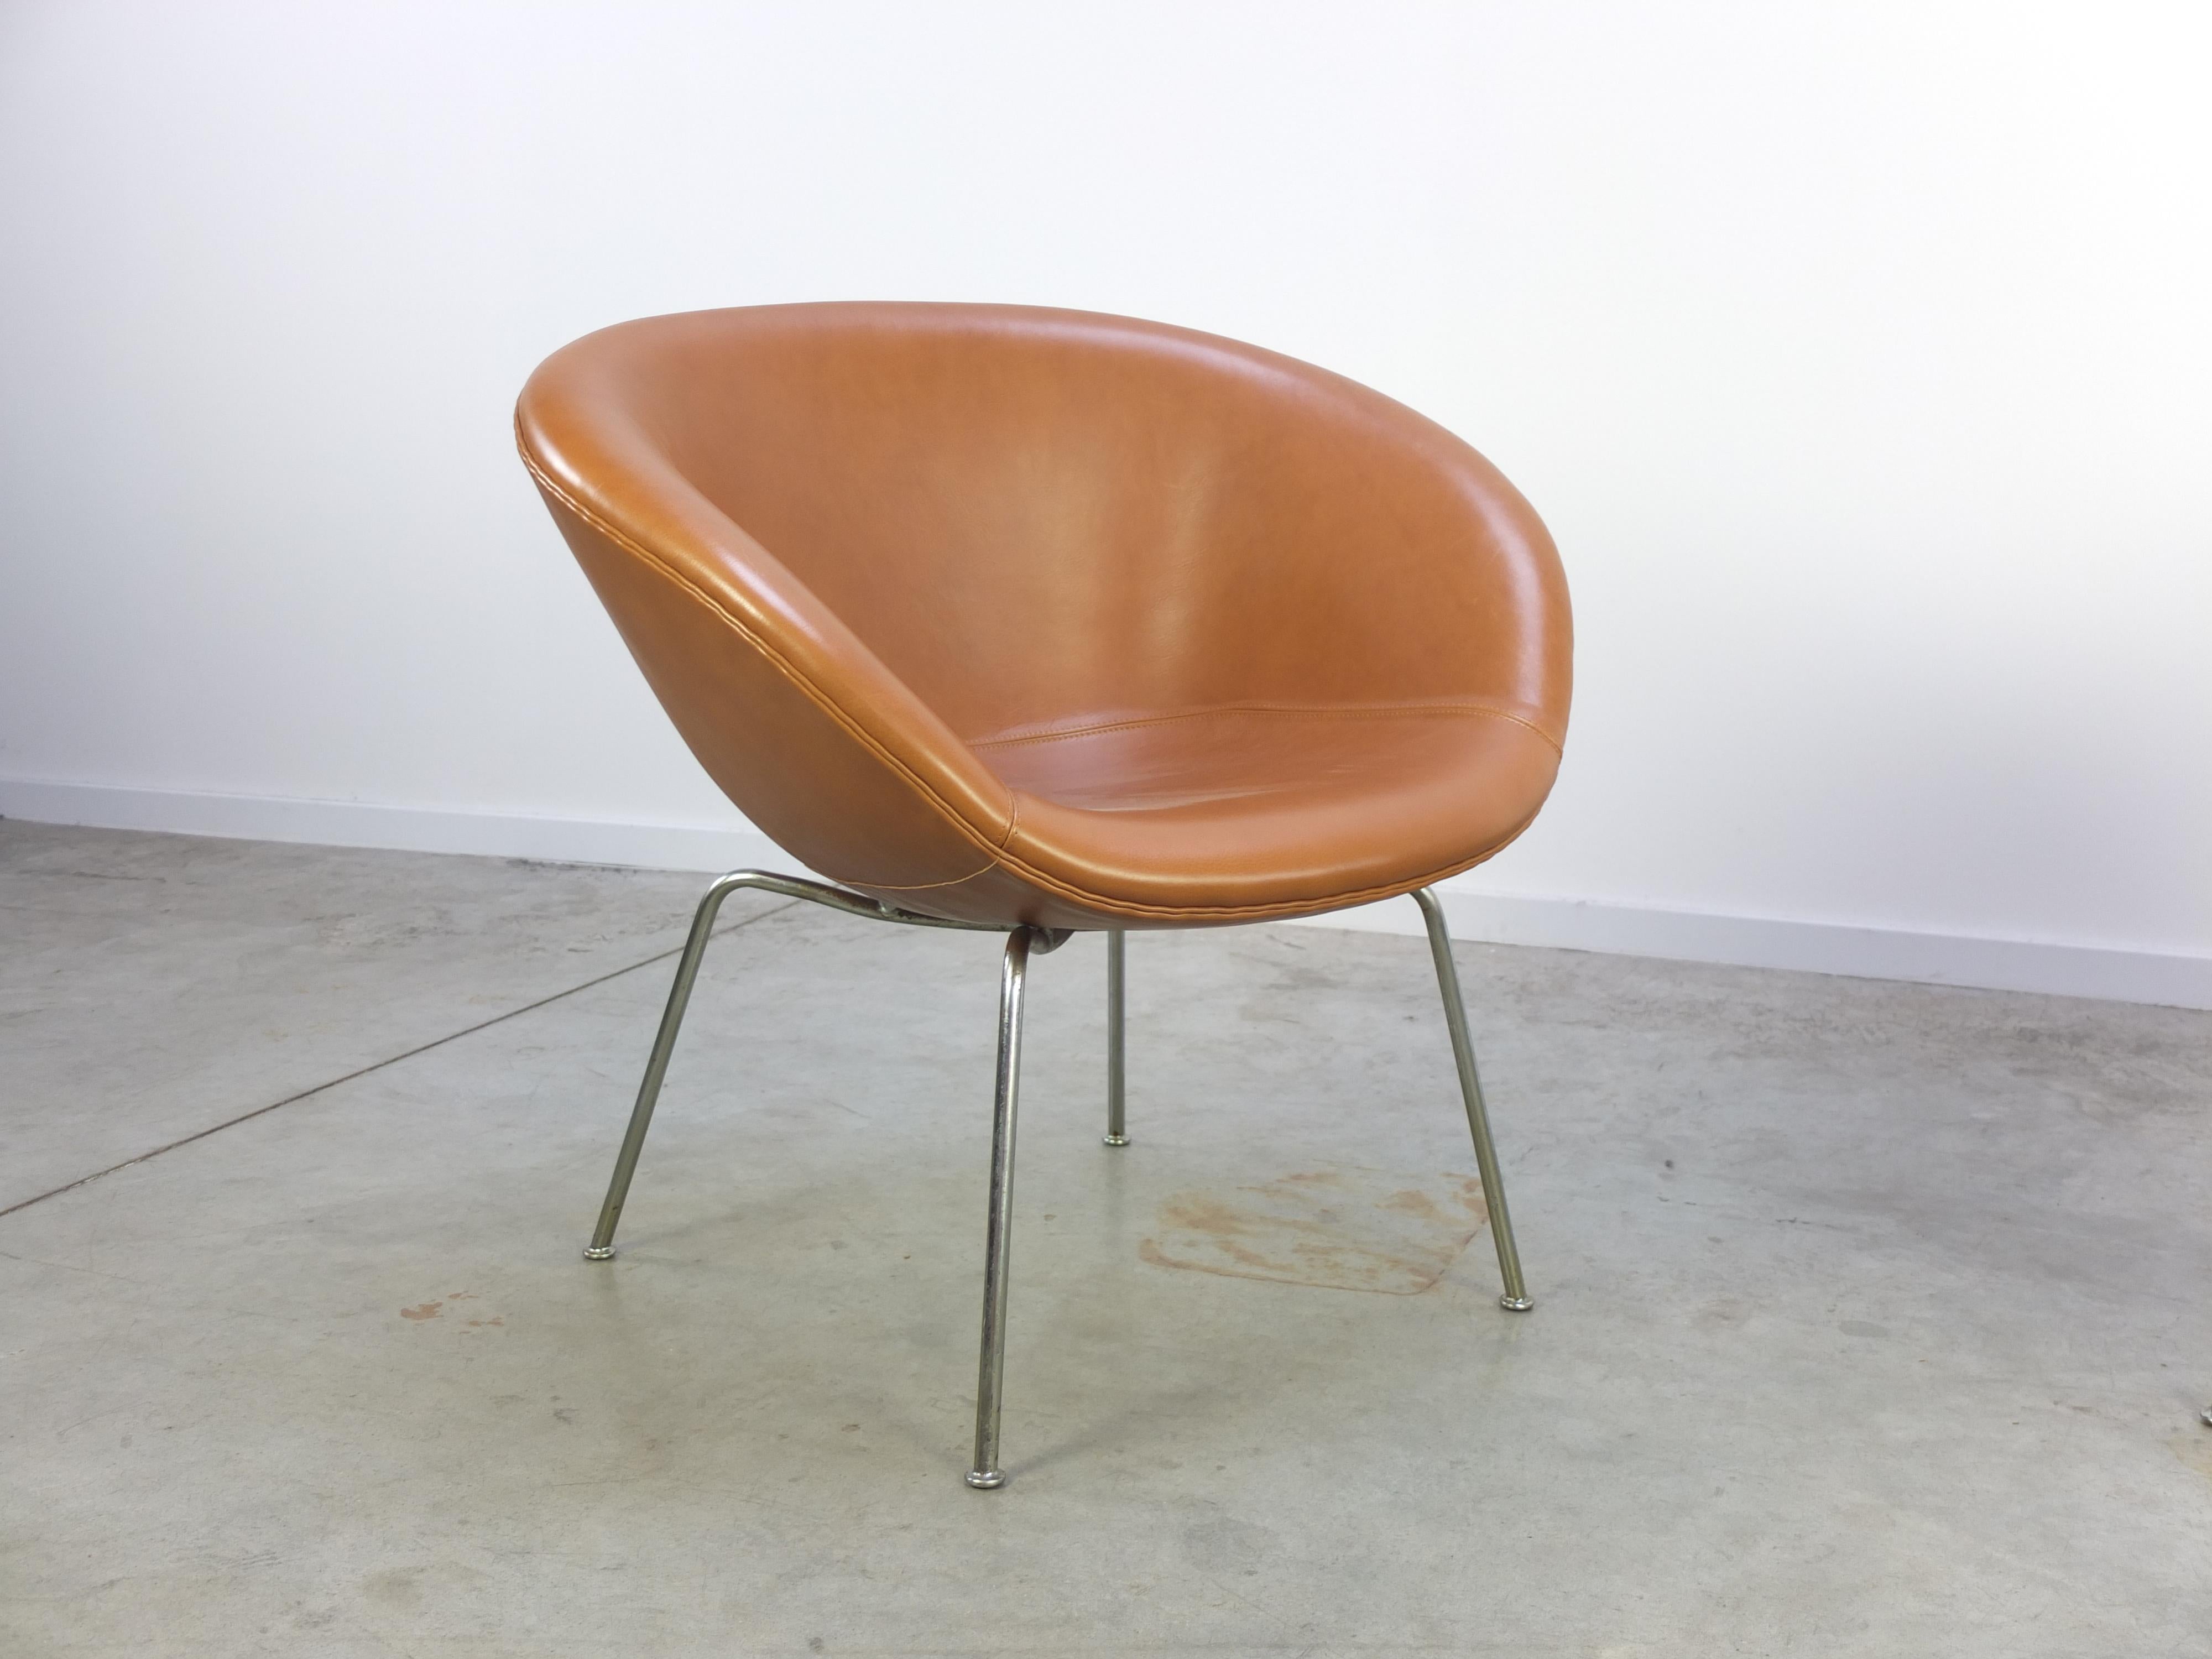 Early Pair of 'Pot' Lounge Chairs by Arne Jacobsen for Fritz Hansen, 1950s For Sale 6